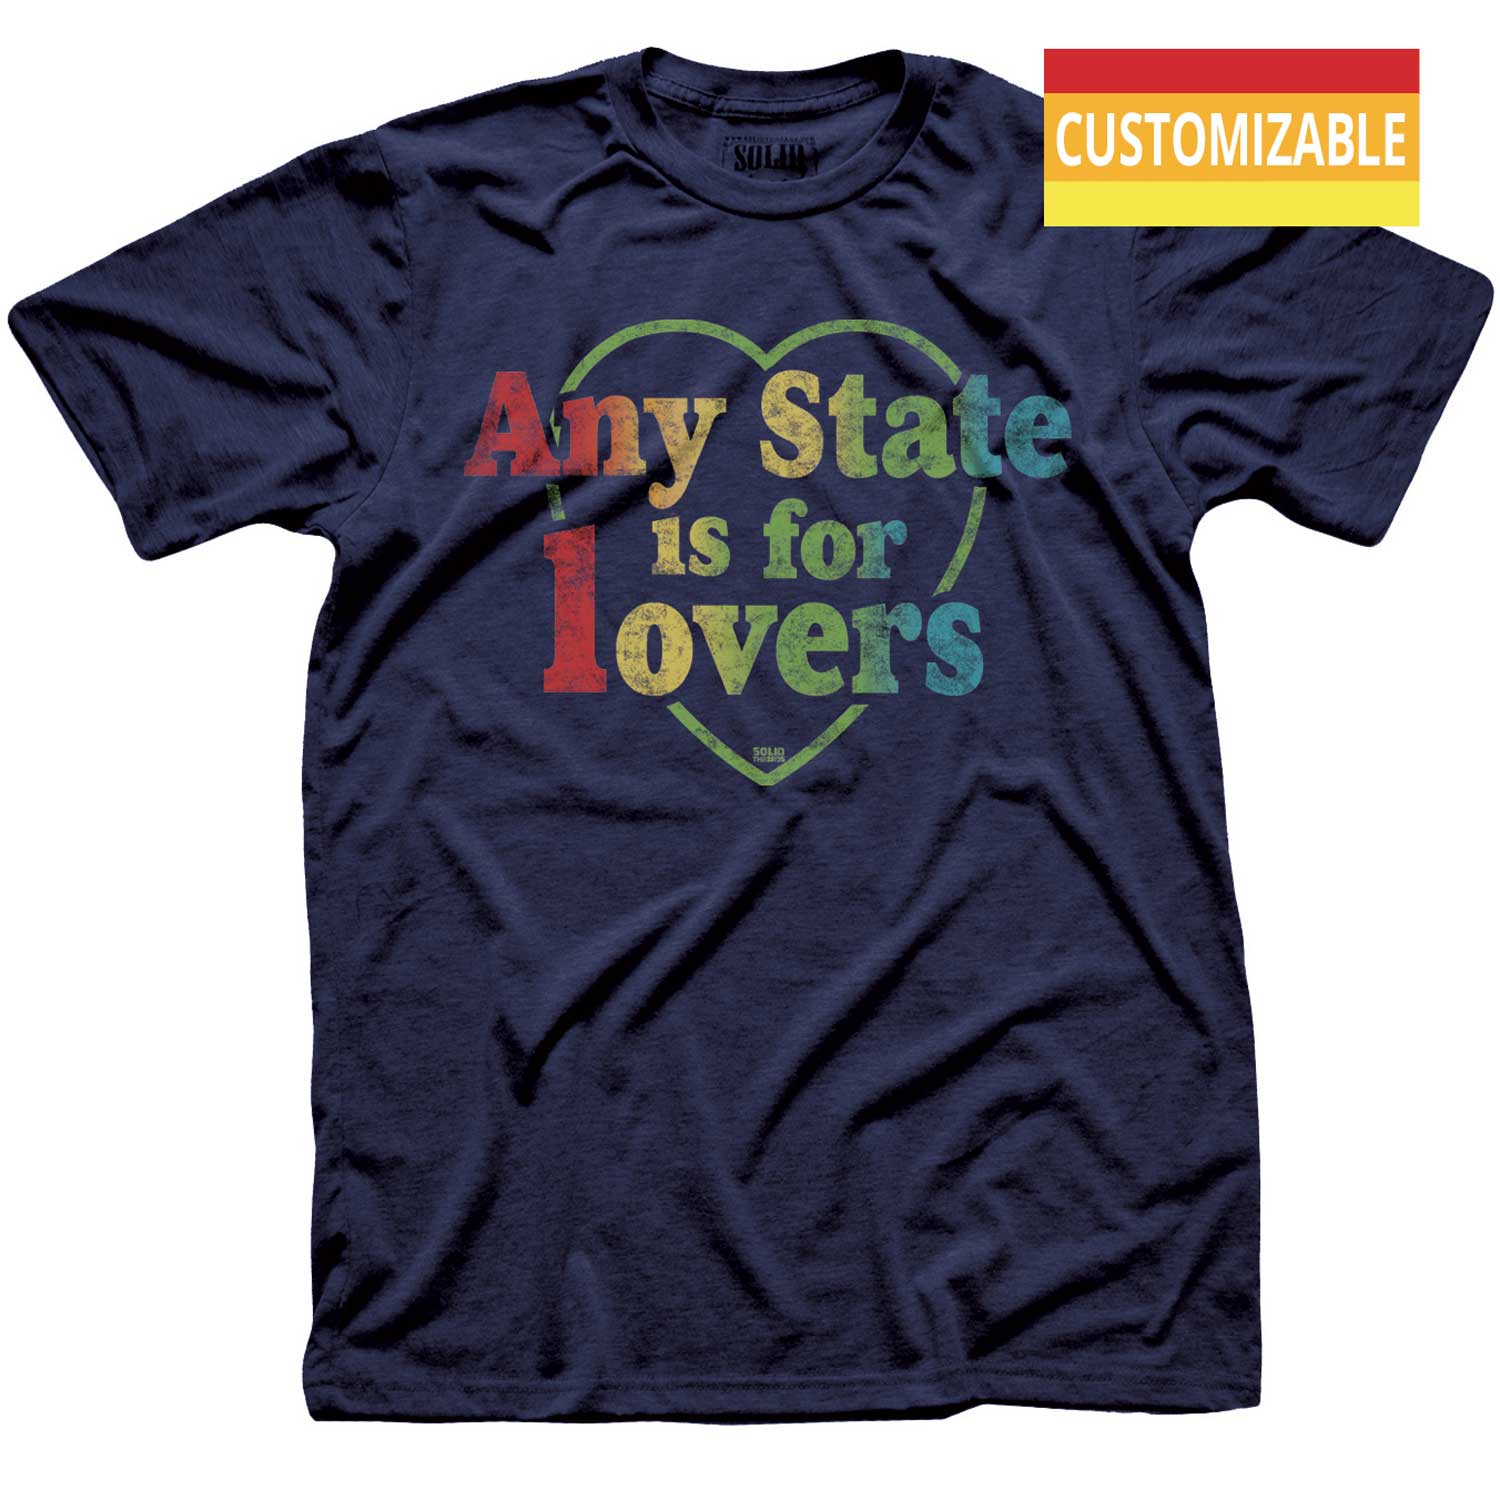 Men's "Any State" Is For Lovers Personalized Graphic T-Shirt | Retro Customized Tee | Solid Threads